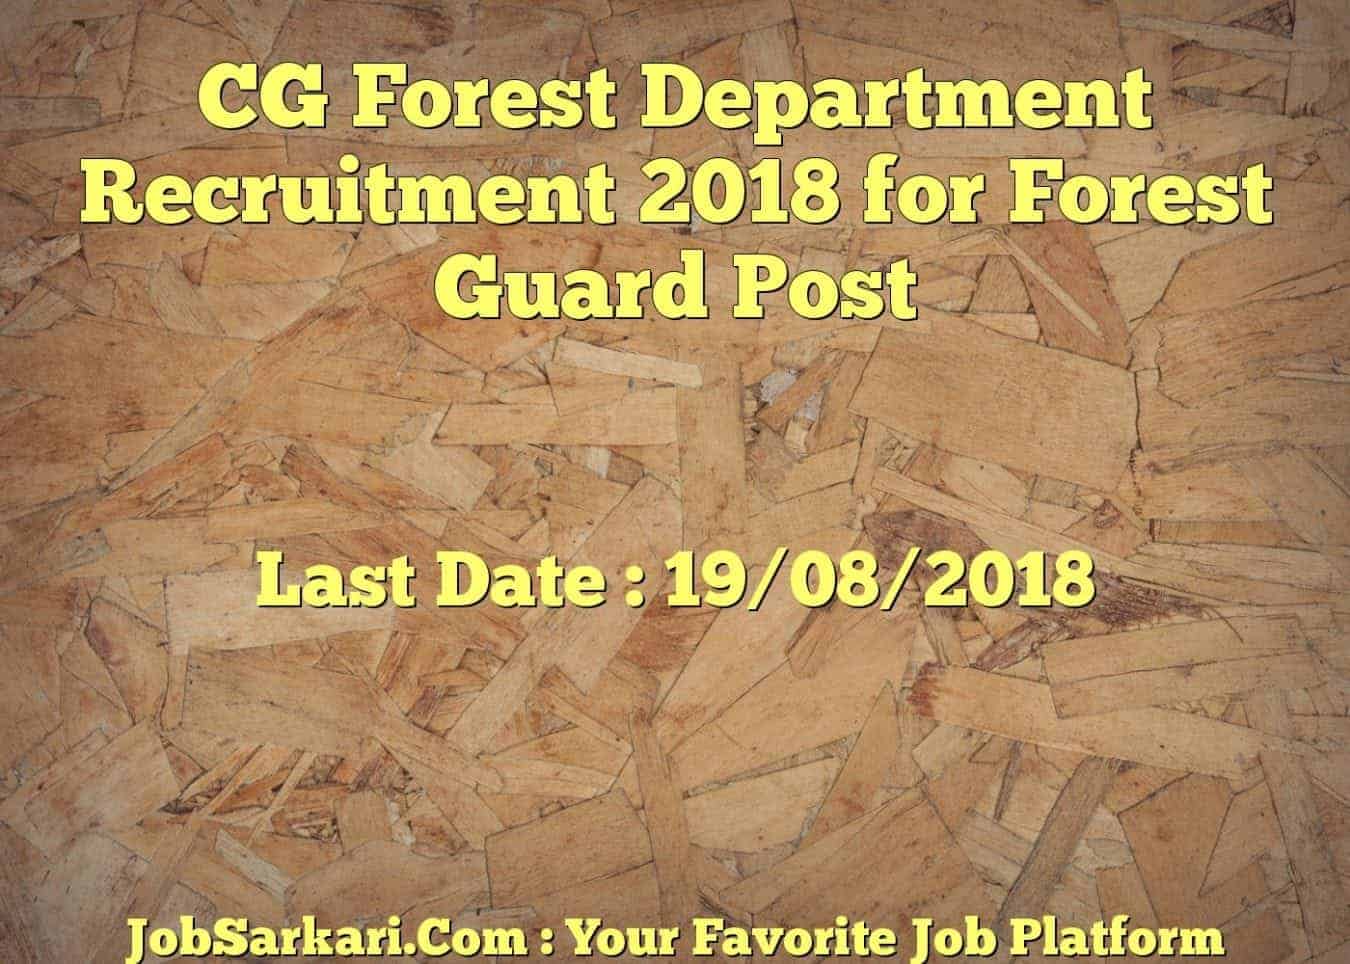 CG Forest Department Recruitment 2018 for Forest Guard Post